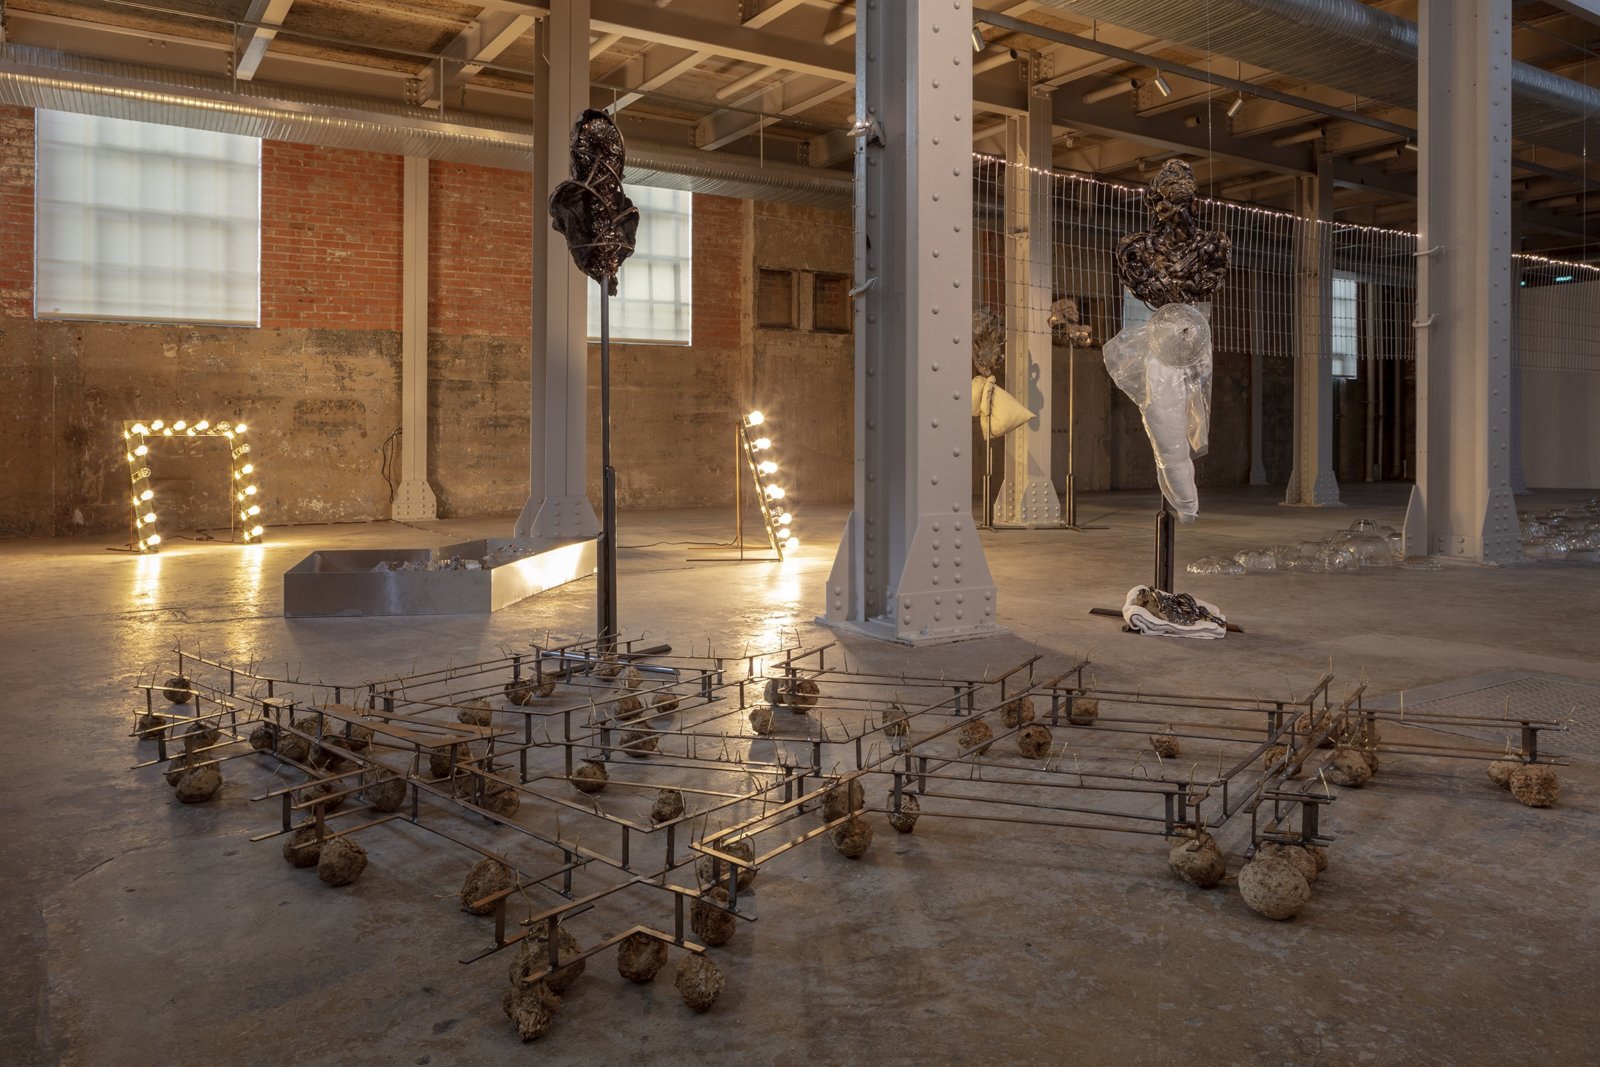 Rochelle Goldberg, Track (can you trigger the switch?), 2018, celeriac, steel, brass, dispersion paint, 8 x 139 x 71 in. (20 x 353 x 180 cm). Installation view, born in a beam of light, The Power Station, Dallas, 2019